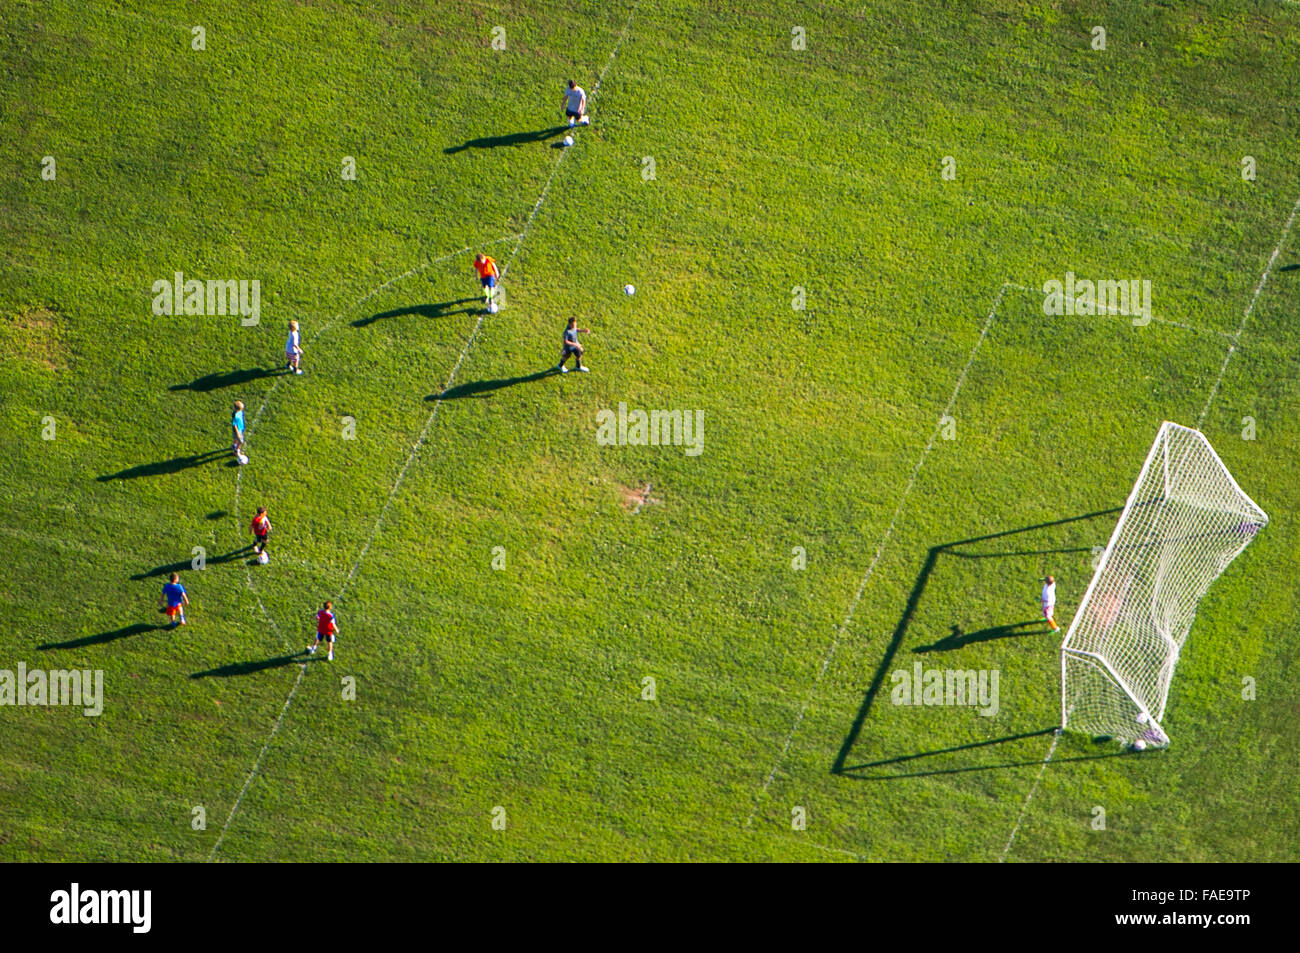 Aerial view of a soccer team practicing field goals Stock Photo